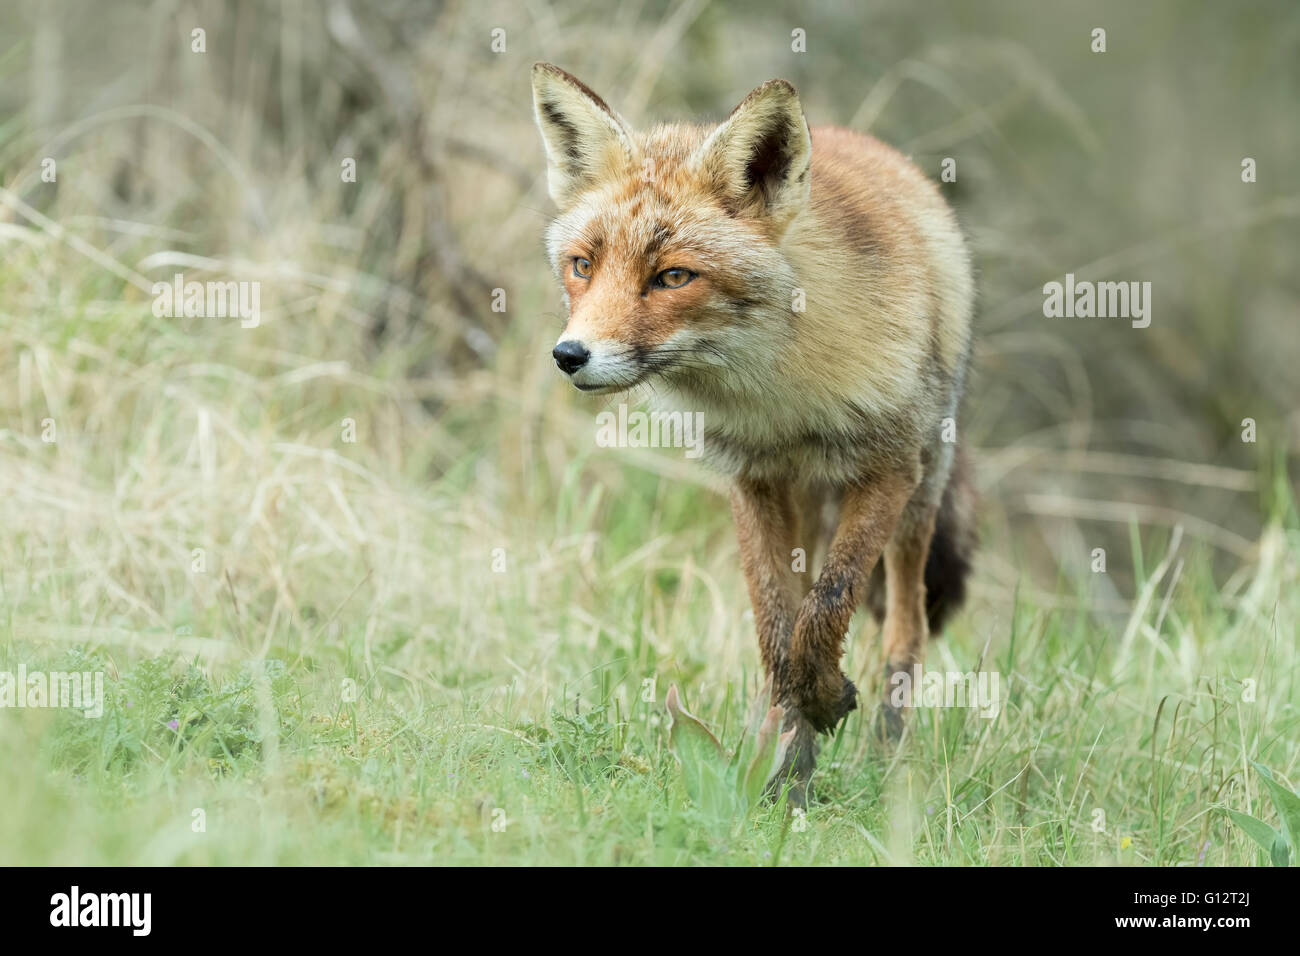 Wild young red fox (vulpes vulpes) vixen scavenging in a forest Stock Photo